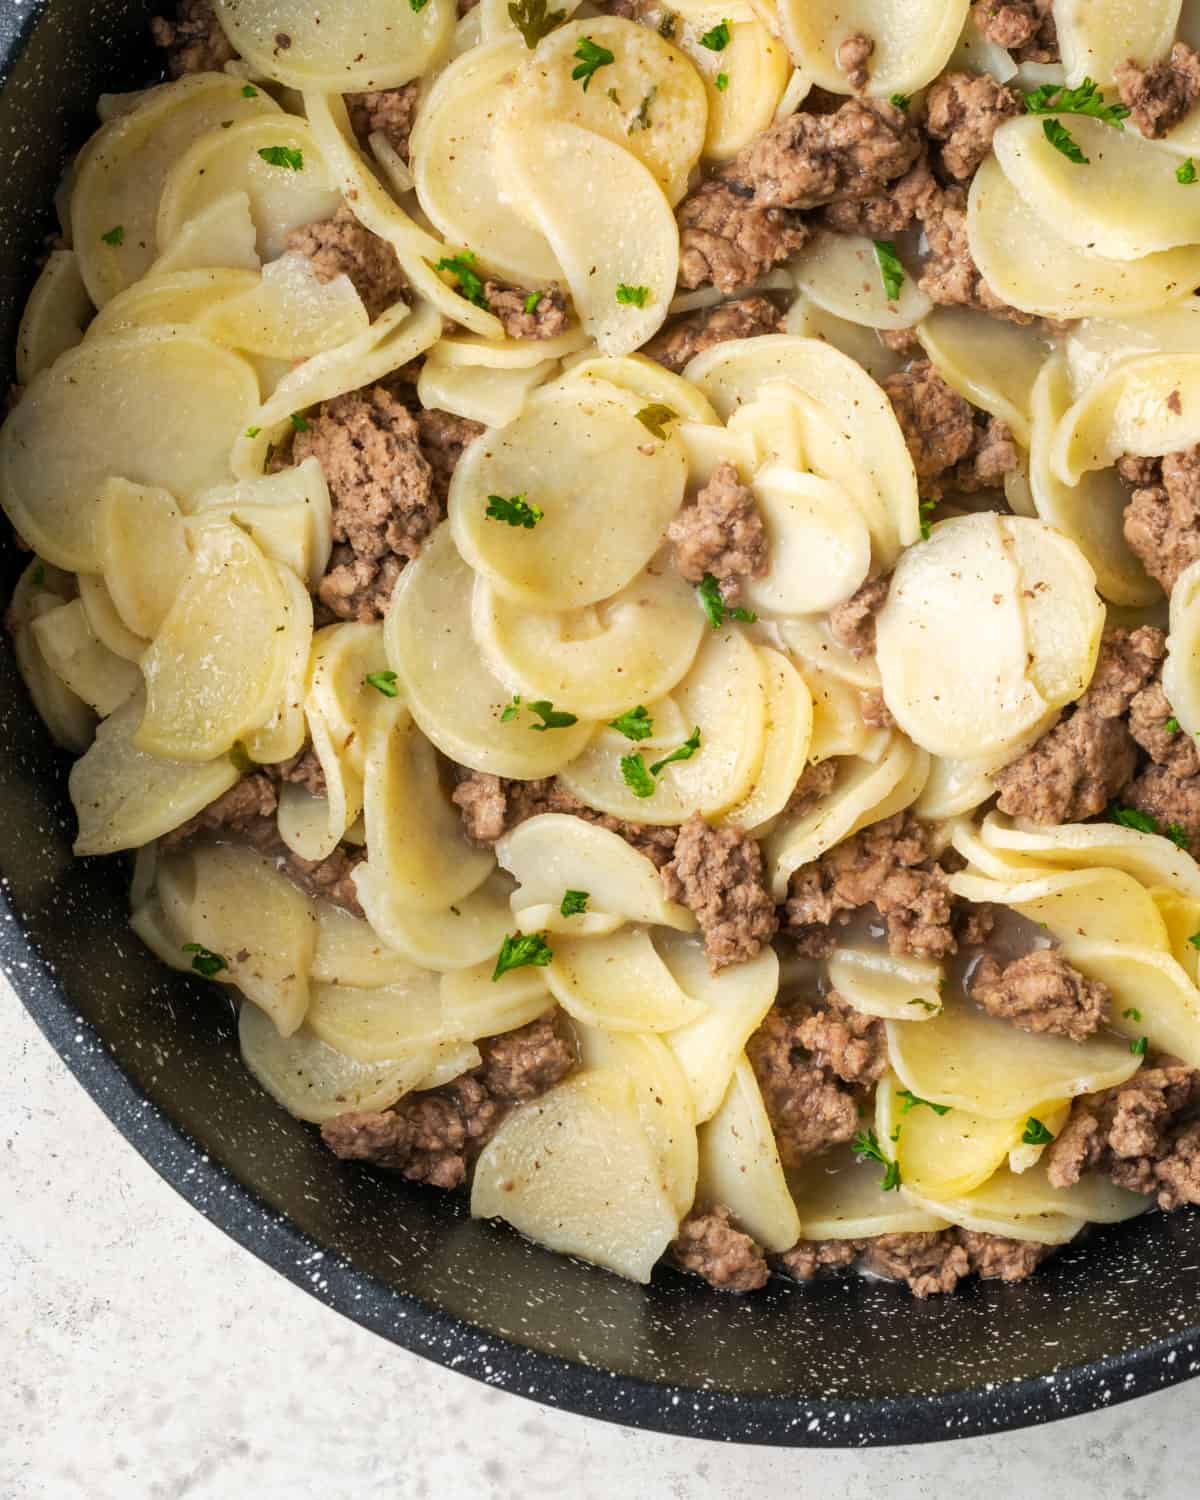 Cooked potatoes and ground beef in a flavorful sauce.